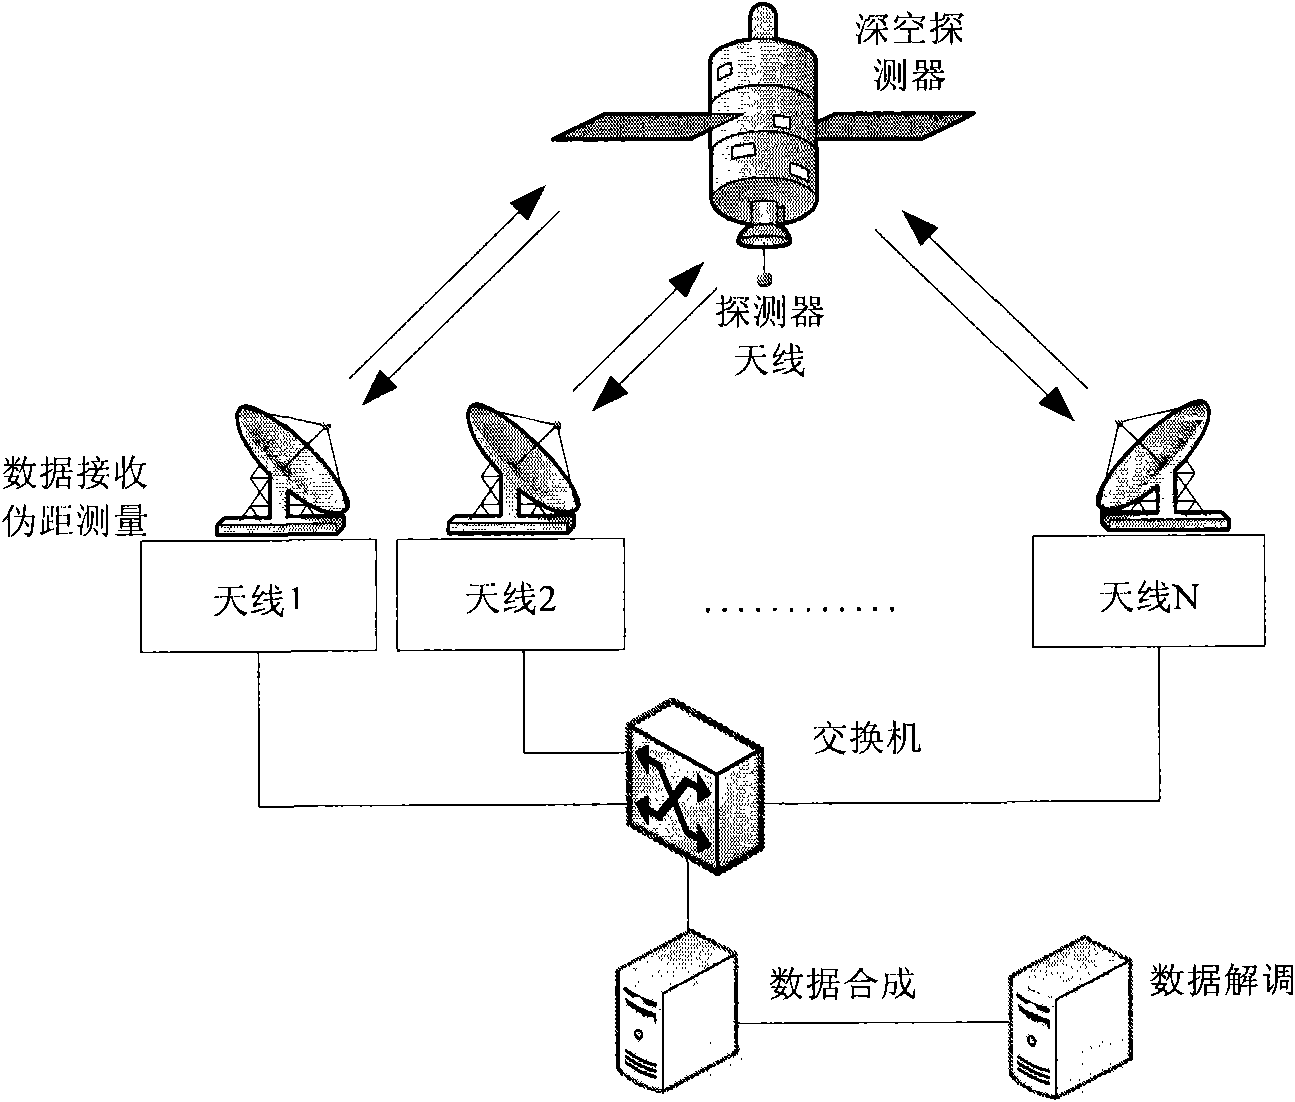 Circulating self-correlation-based signal phase difference estimation device and method for antenna array